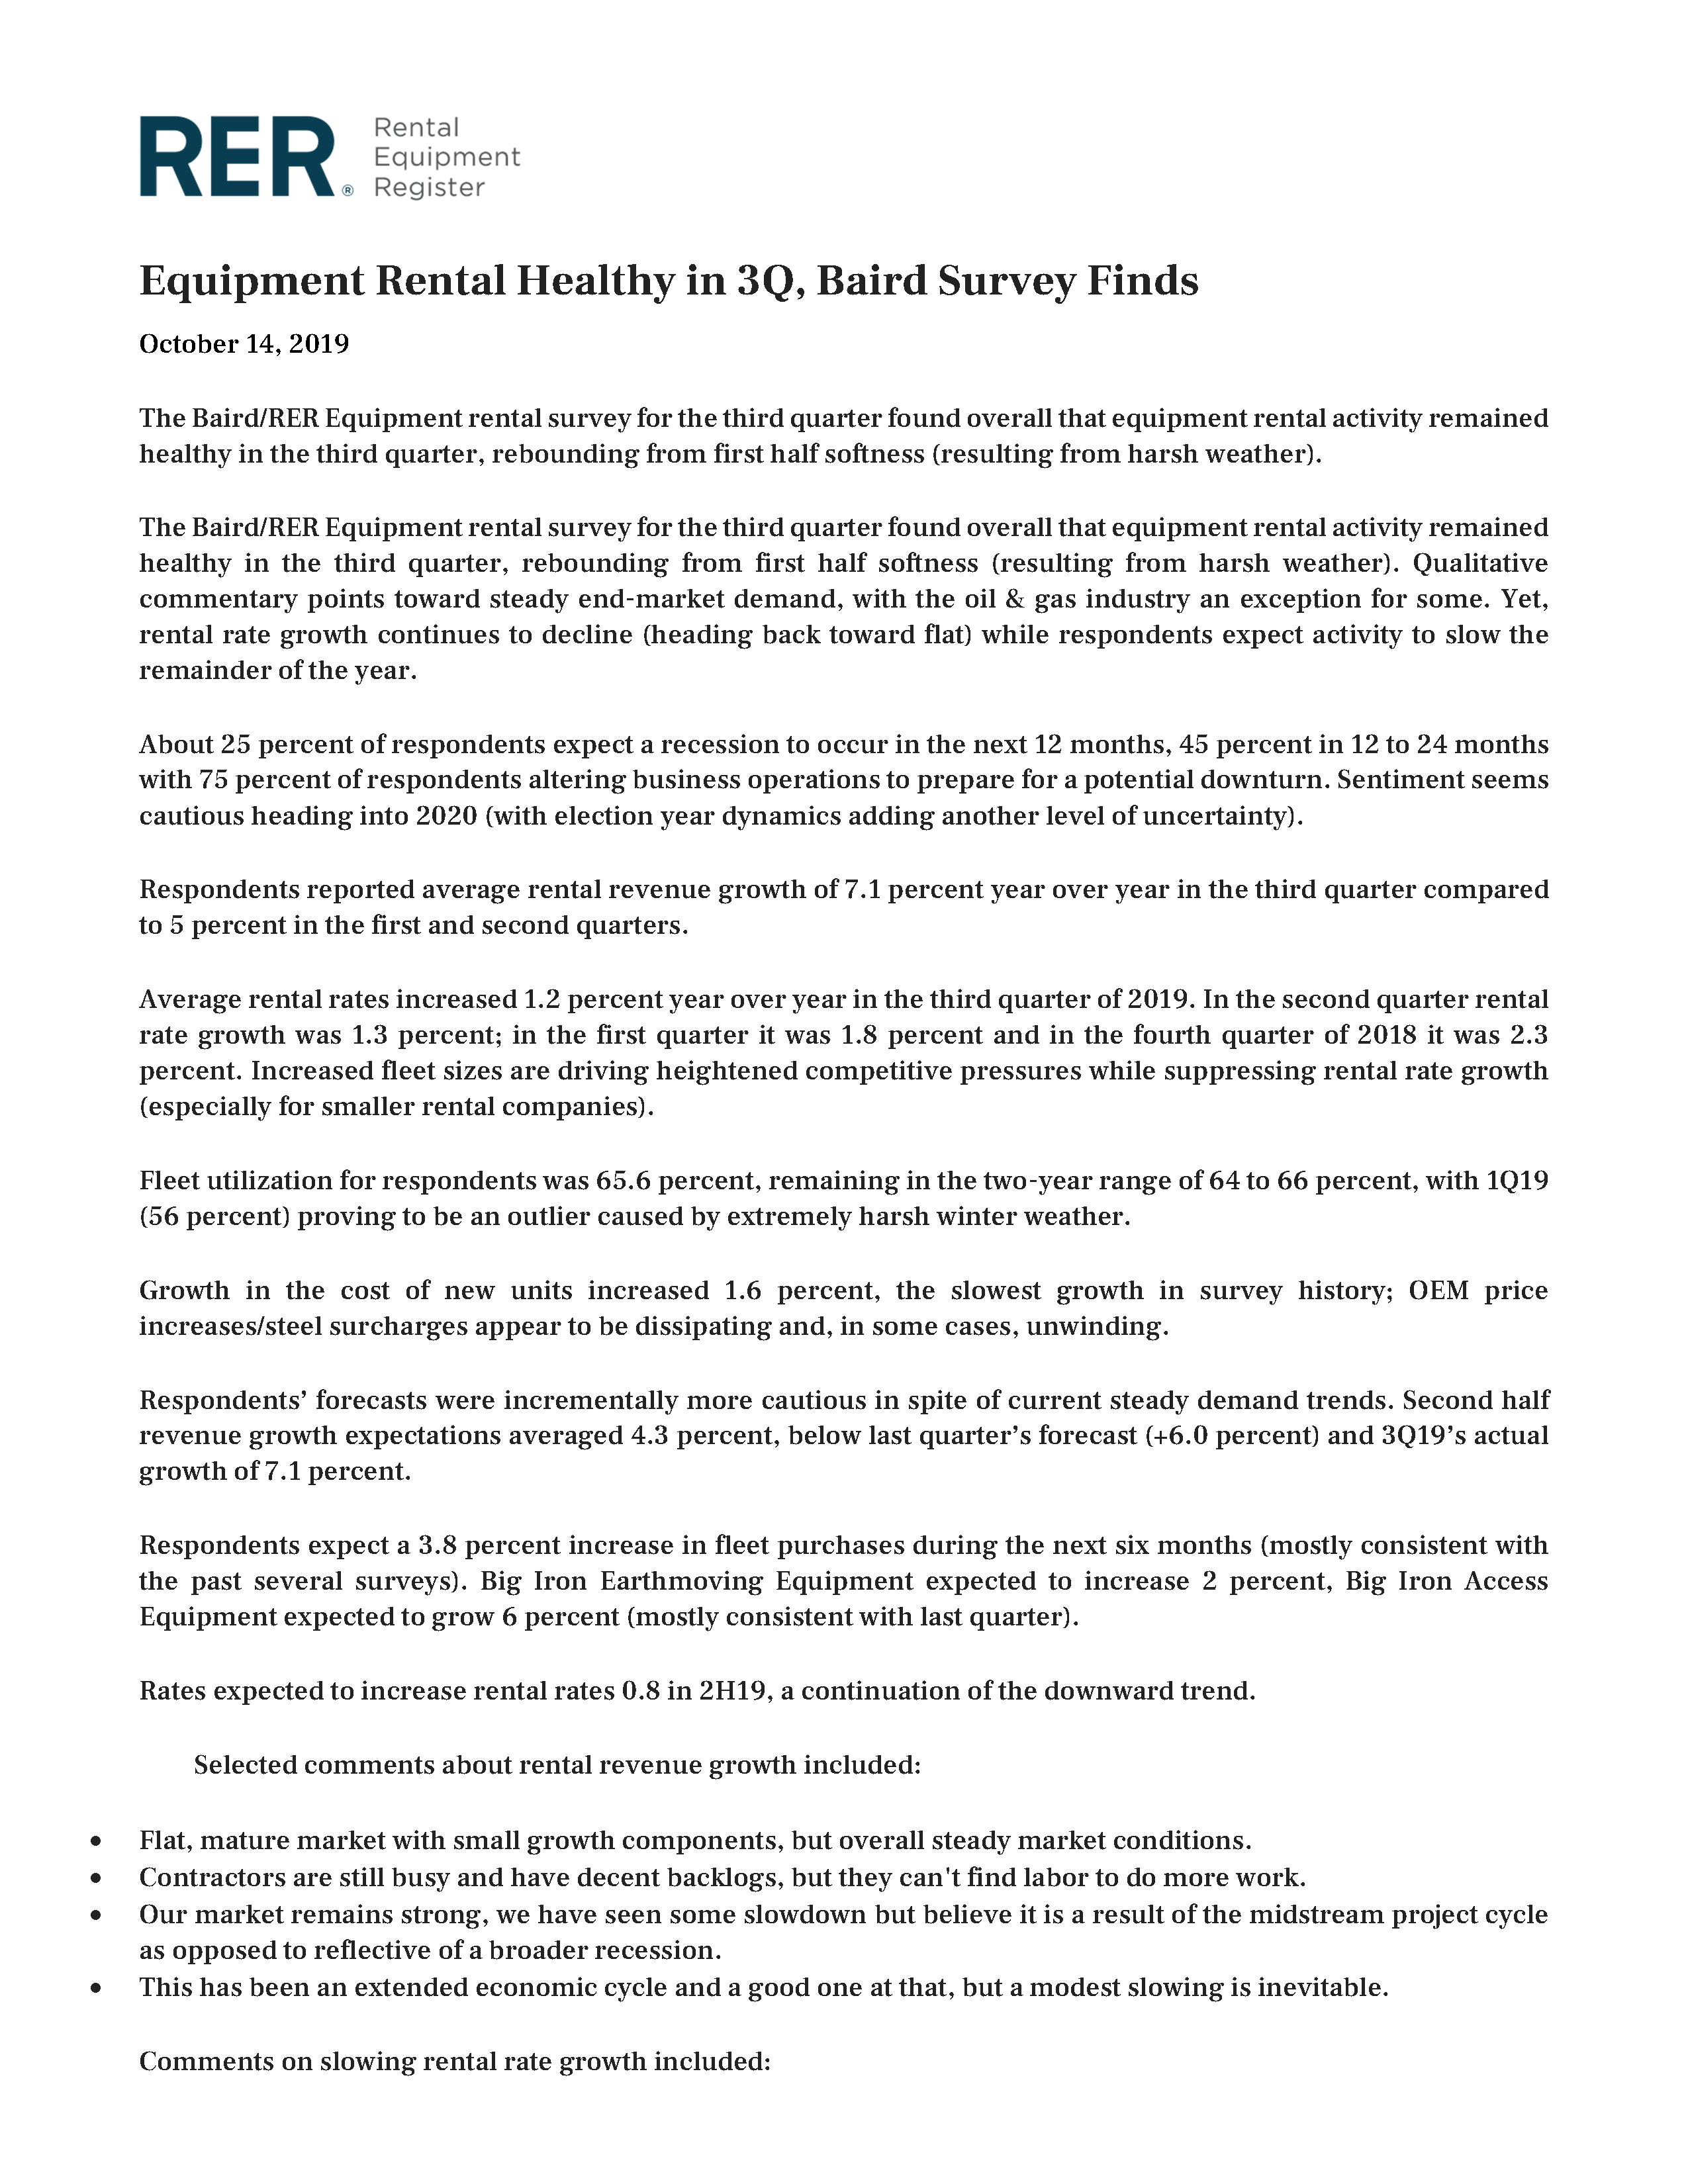 Equipment Rental Healthy in 3Q, Baird Survey Finds 10.14.2019_Page_1